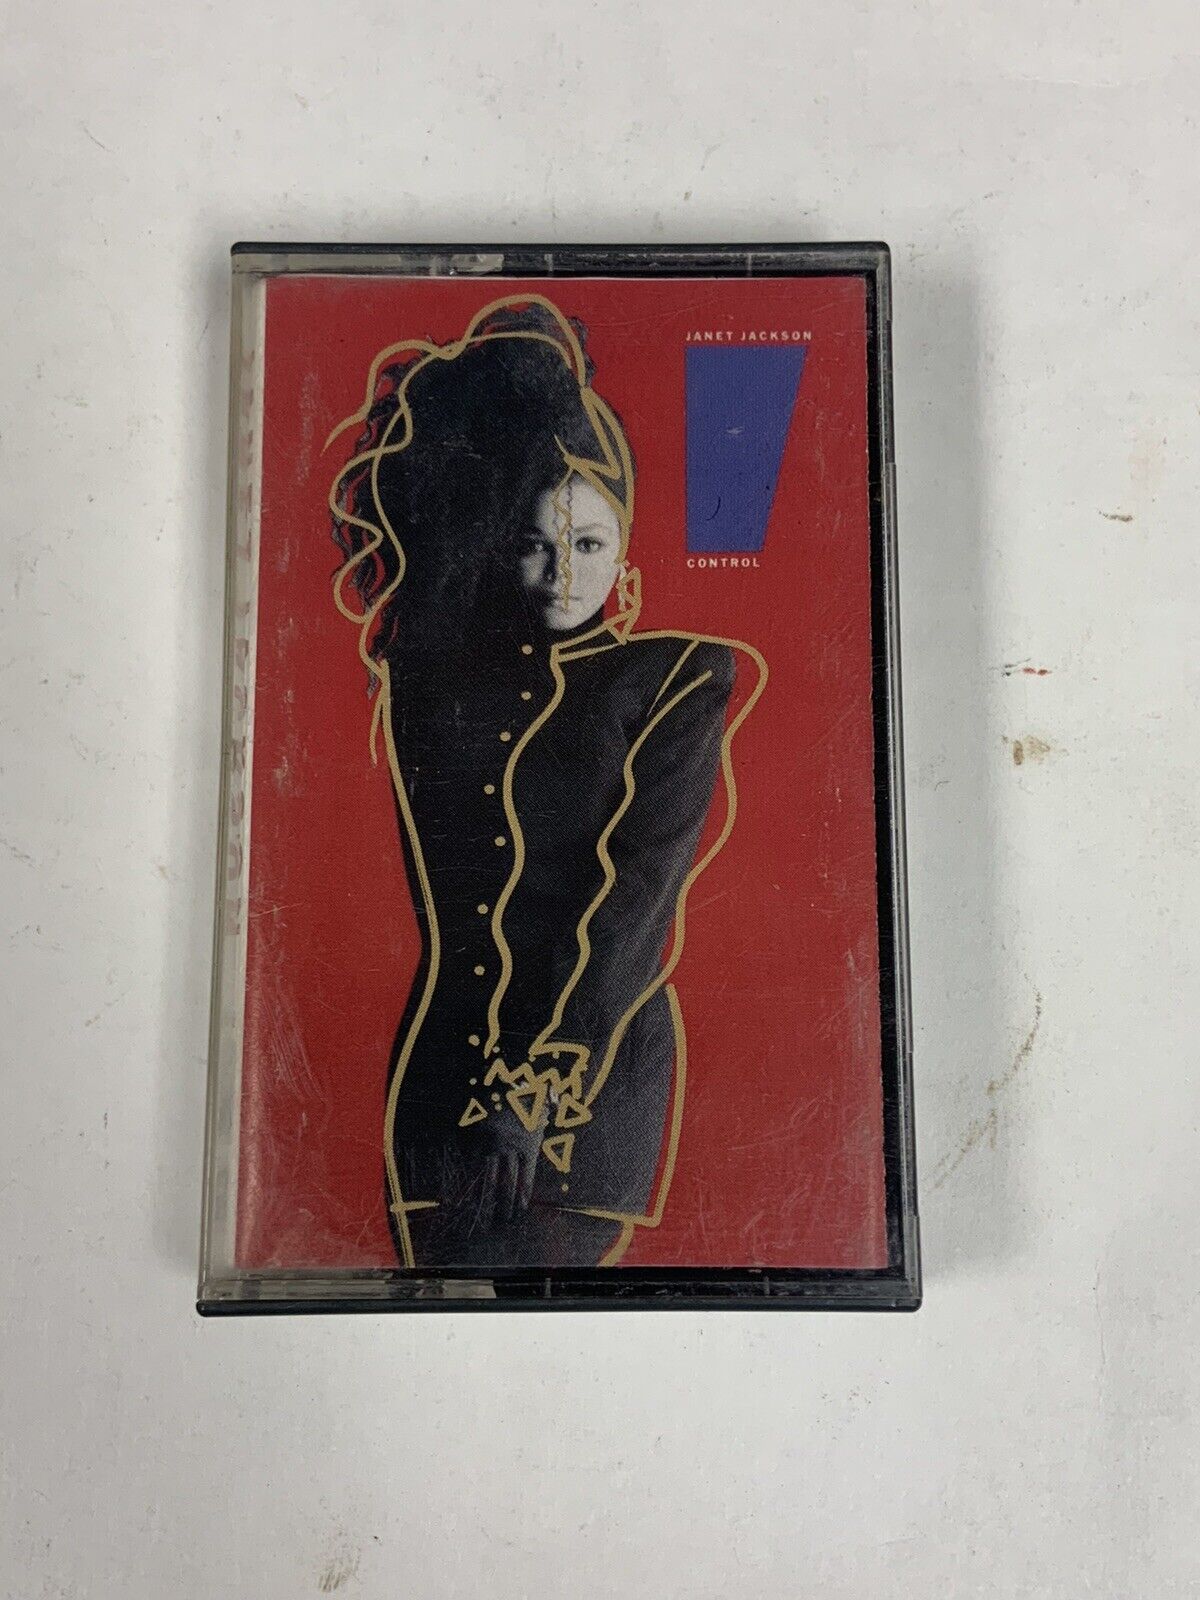 1986 Janet Jackson Control Cassette A&M Records One Owner